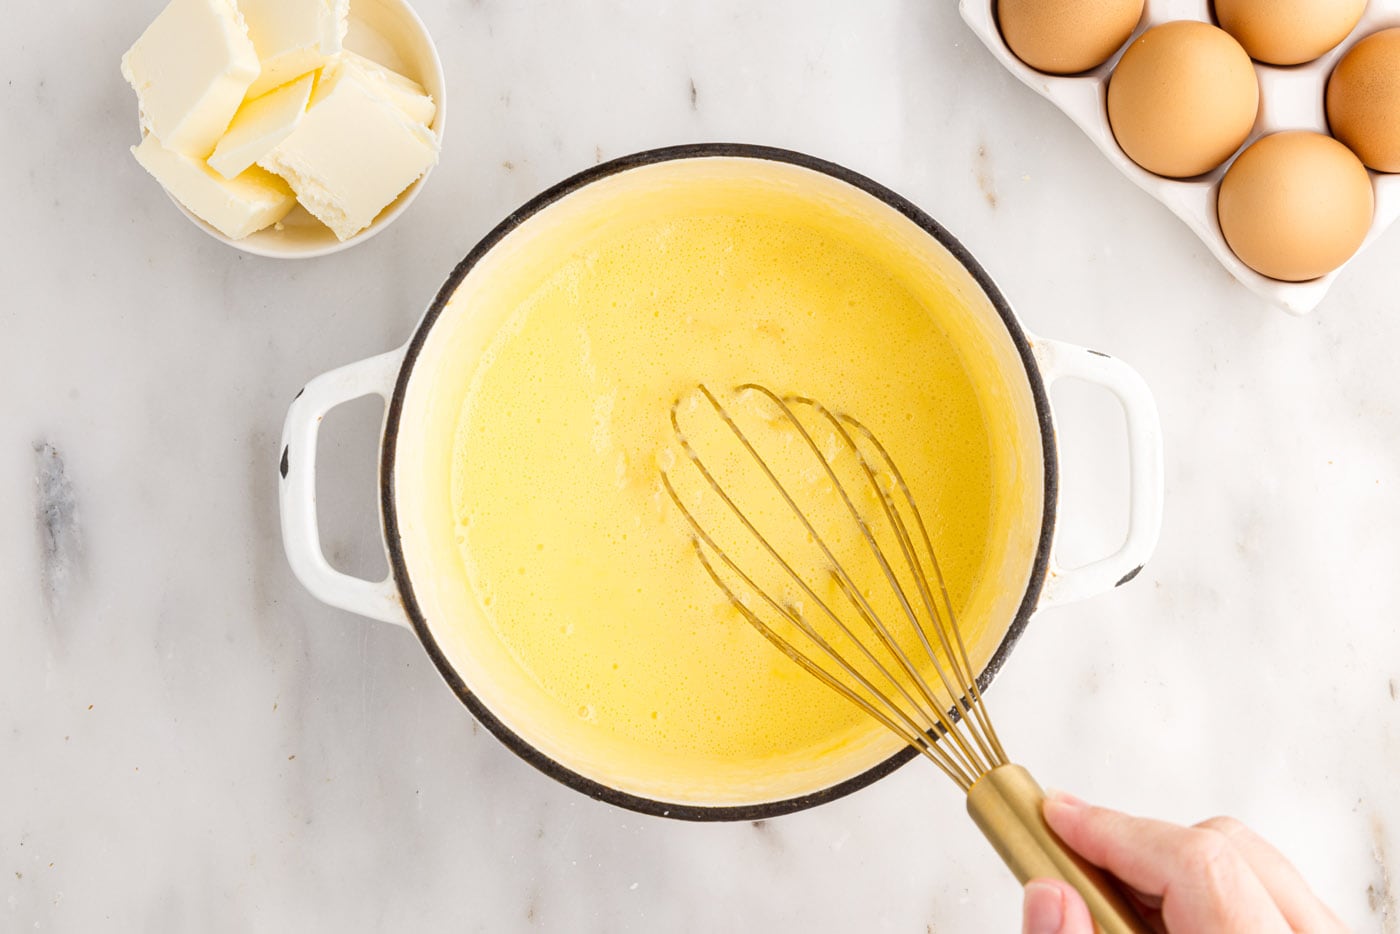 whisking pineapple curd in a saucepan